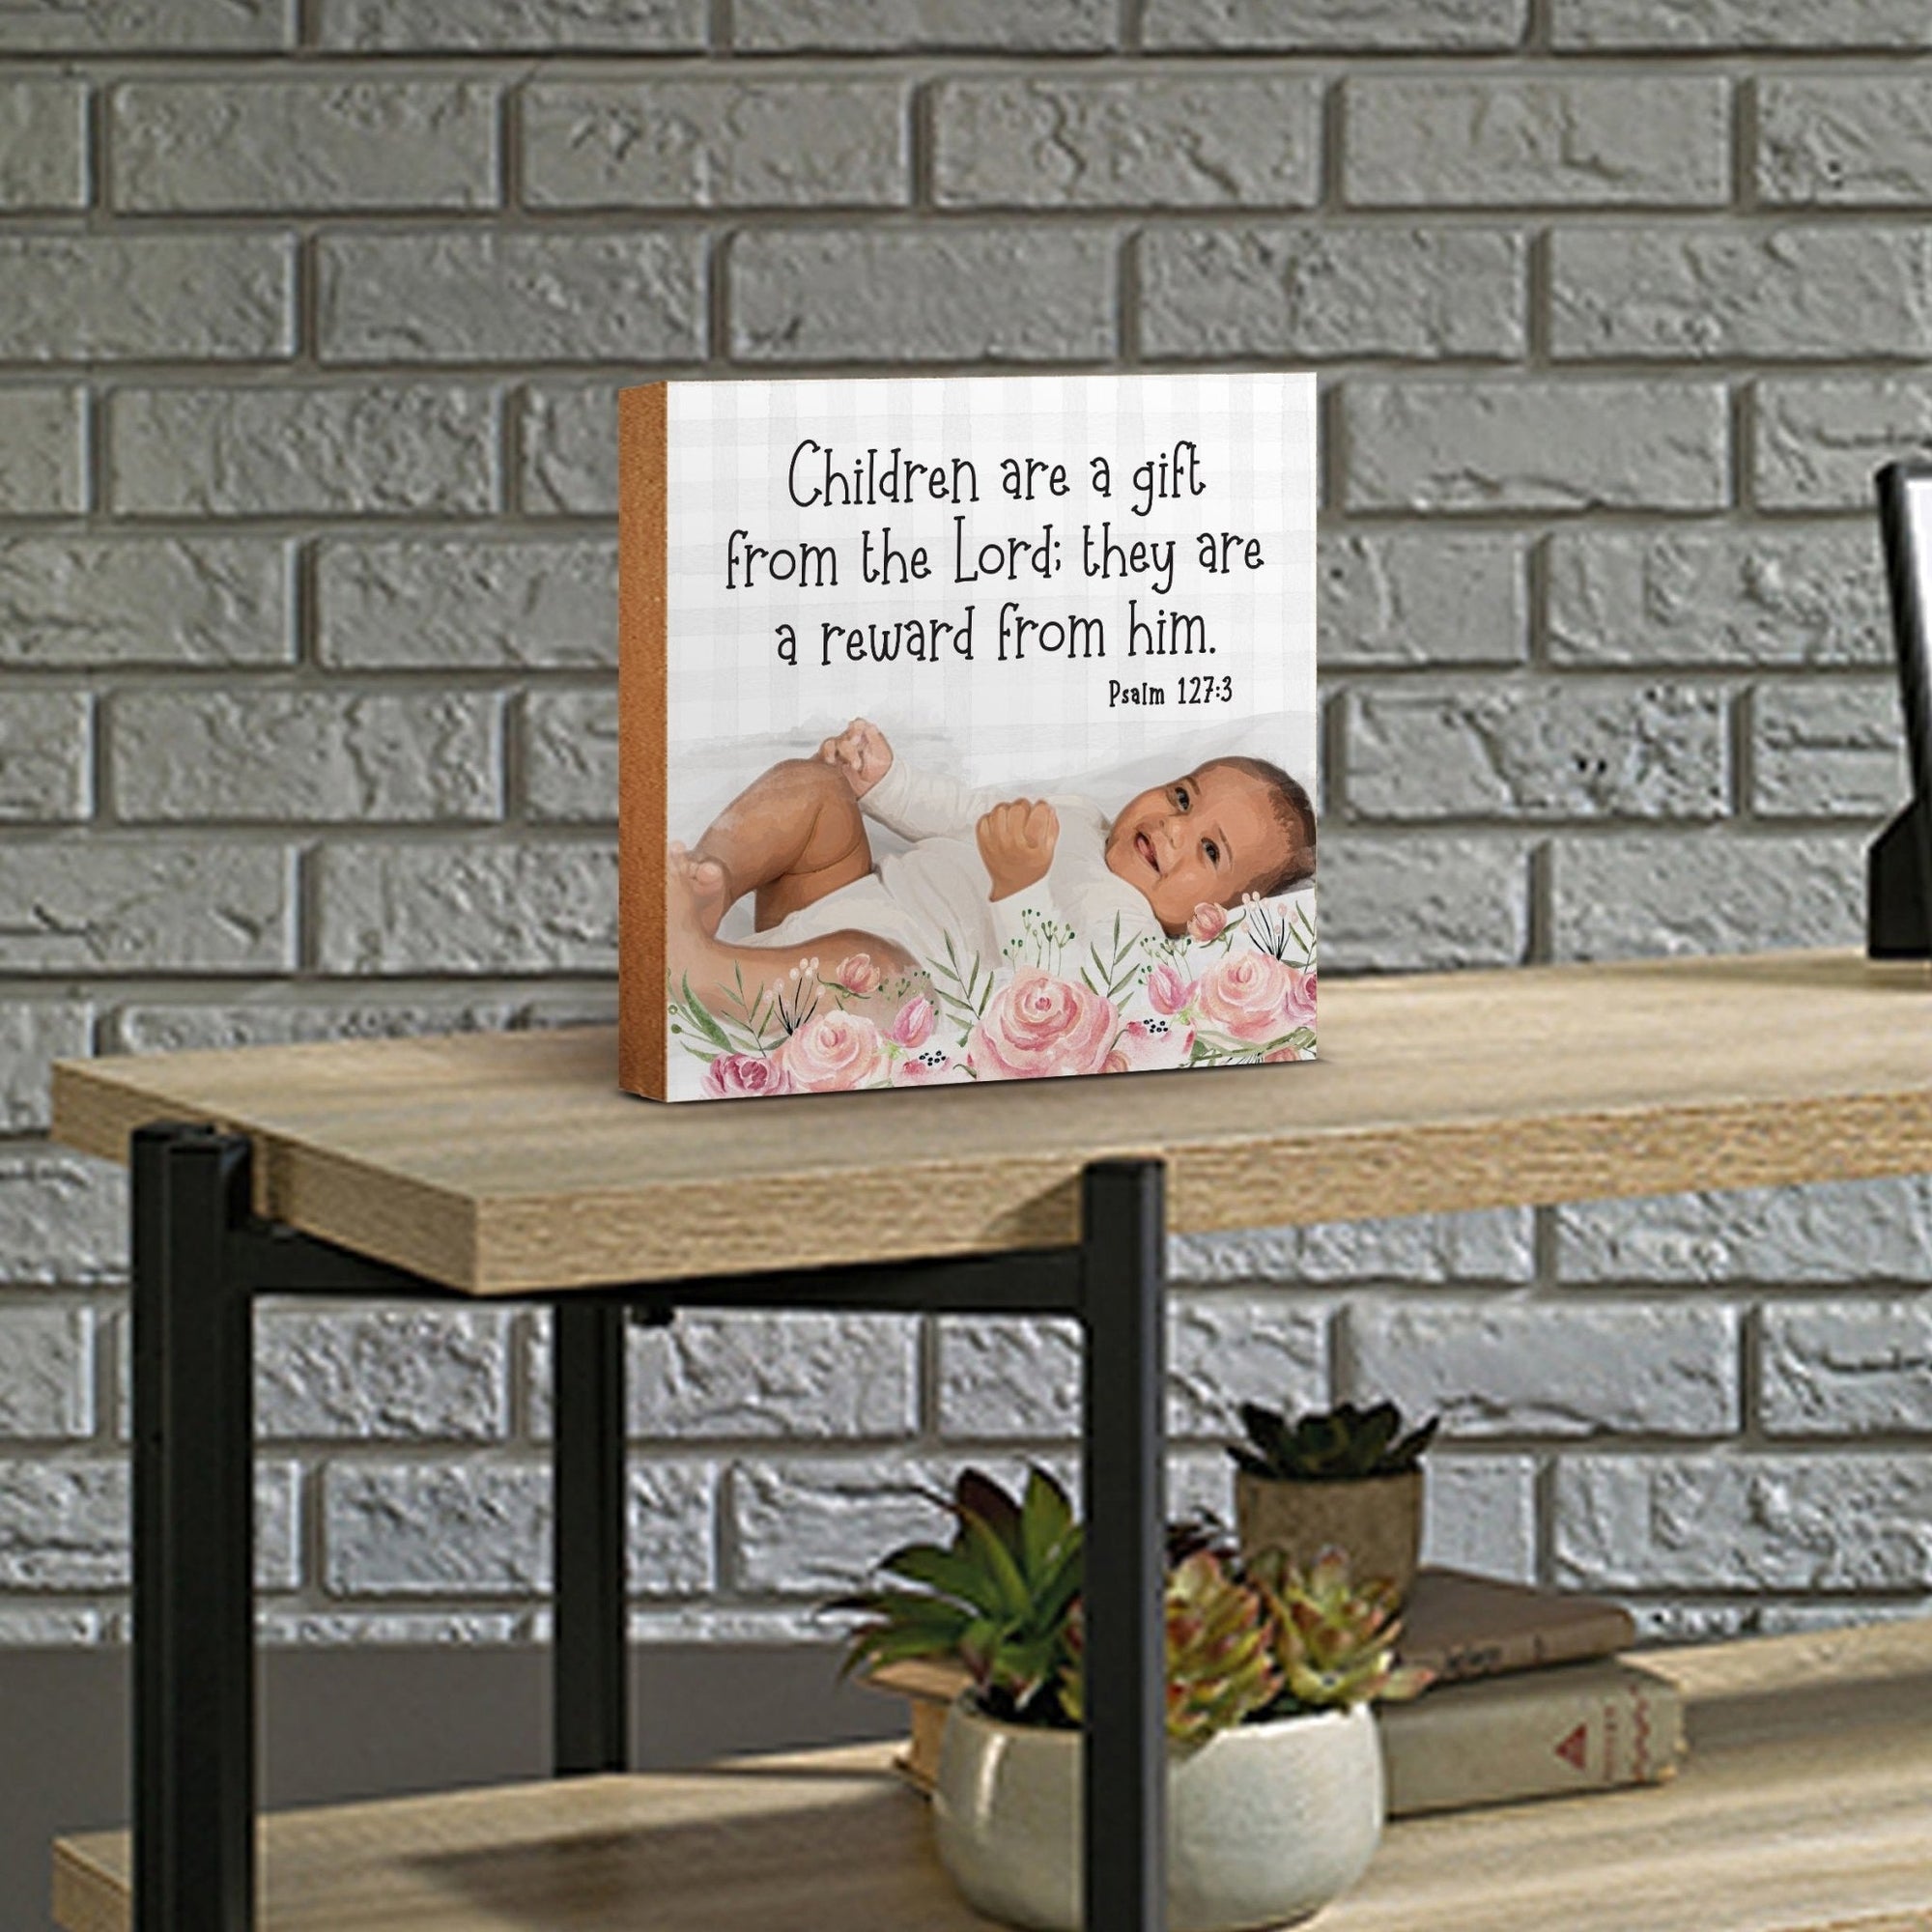 Inspirational Praying Kids Tabletop Decor - Perfect tabletop decoration for kids, ideal for a serene ambiance in any room.